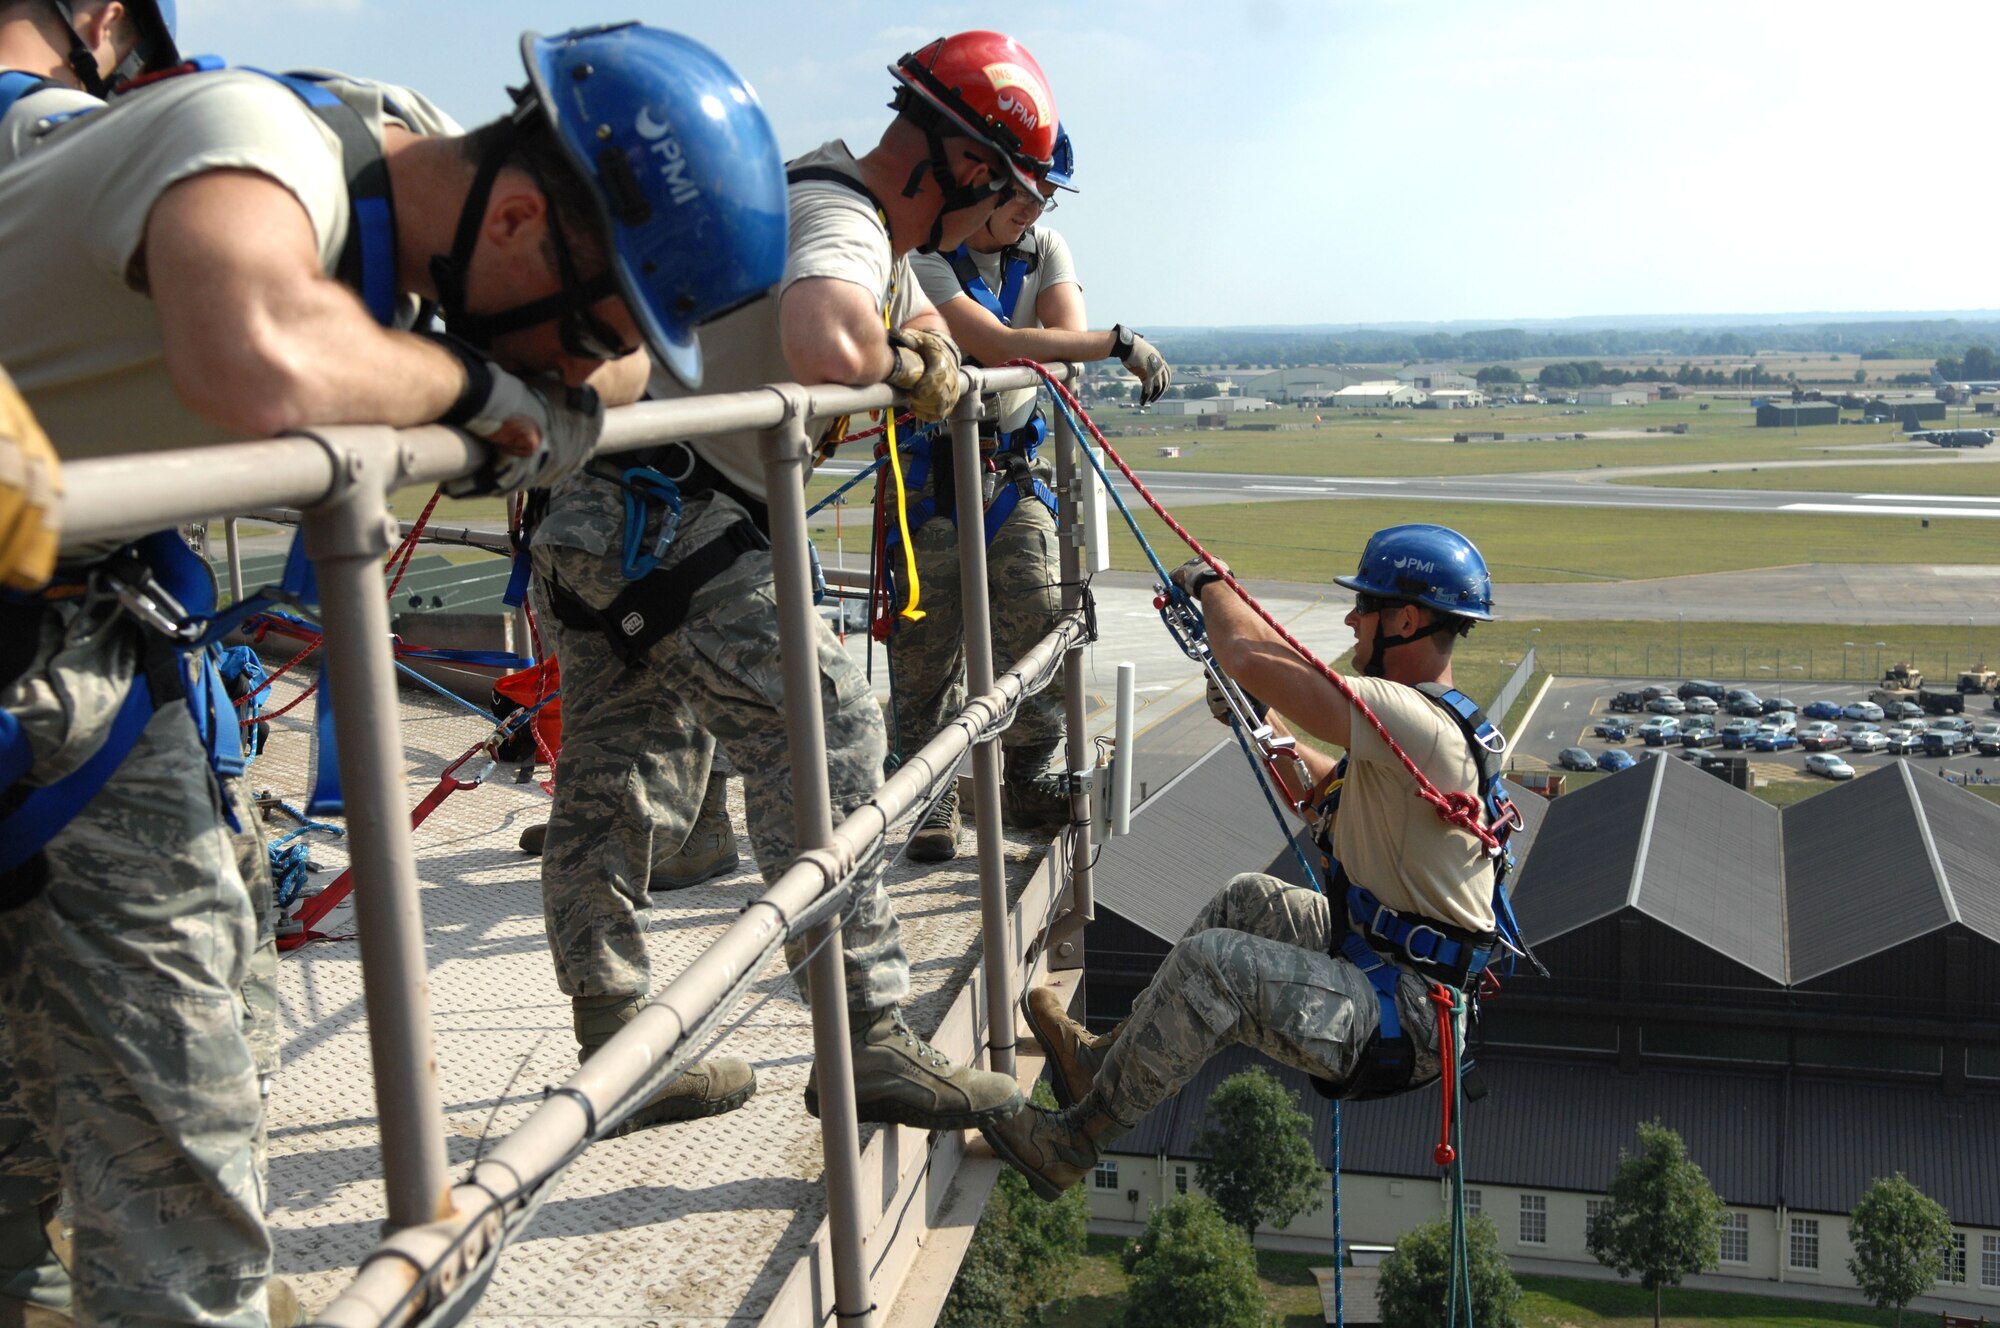 U.S. Air Force Senior Airman Brandon Ah You, right, 100th Civil Engineer Squadron Fire Department firefighter from Thousand Oaks, Calif., begins to rappel Sept. 4, 2013, on RAF Mildenhall, England. Firefighters must train to be able to safely extract victims from any situation. The rappelling was part of the high-angle portion of the firefighters’ technical rope rescue course. (U.S. Air Force photo by Airman 1st Class Dillon Johnston/Released)